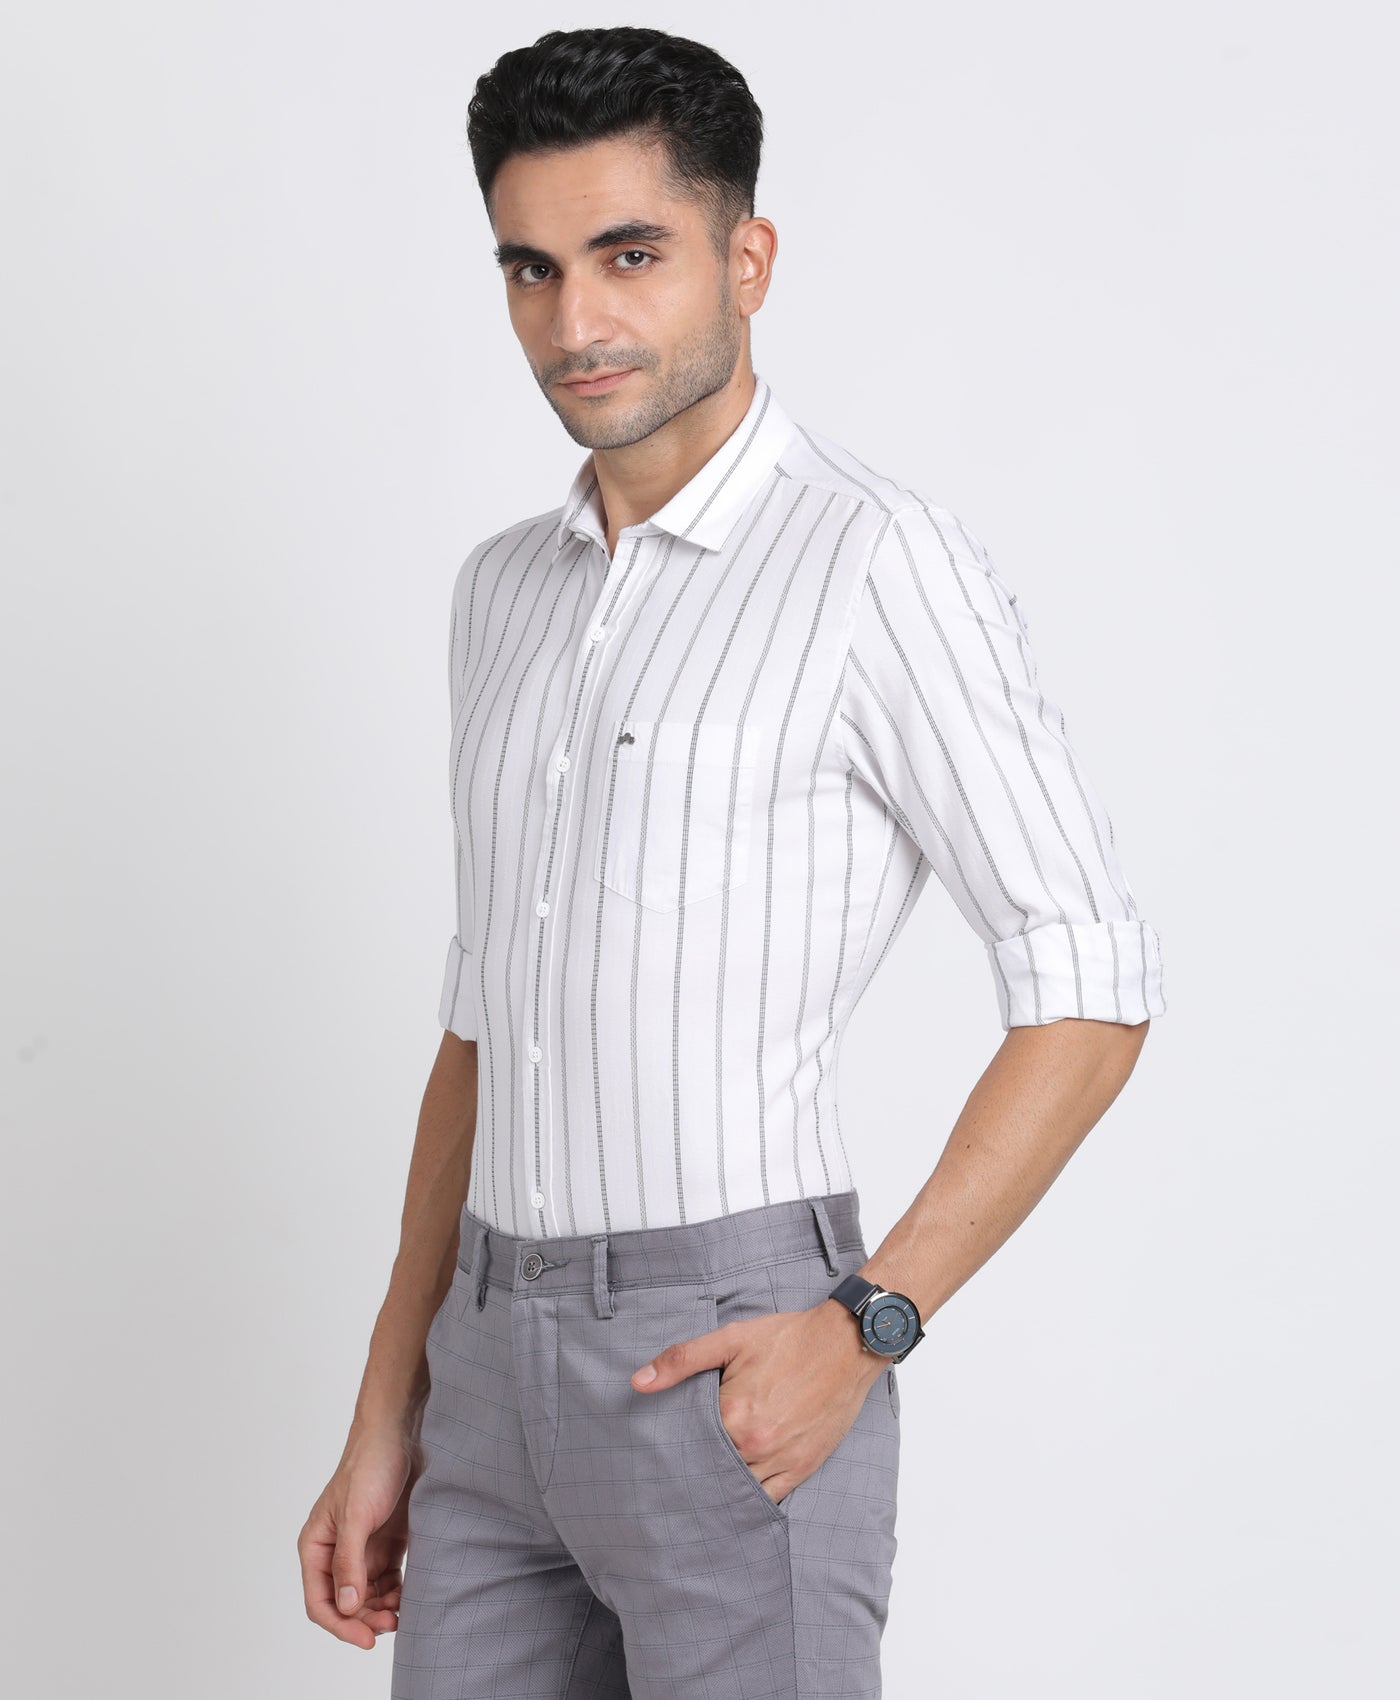 100% Cotton White Striped Slim Fit Full Sleeve Casual Shirt